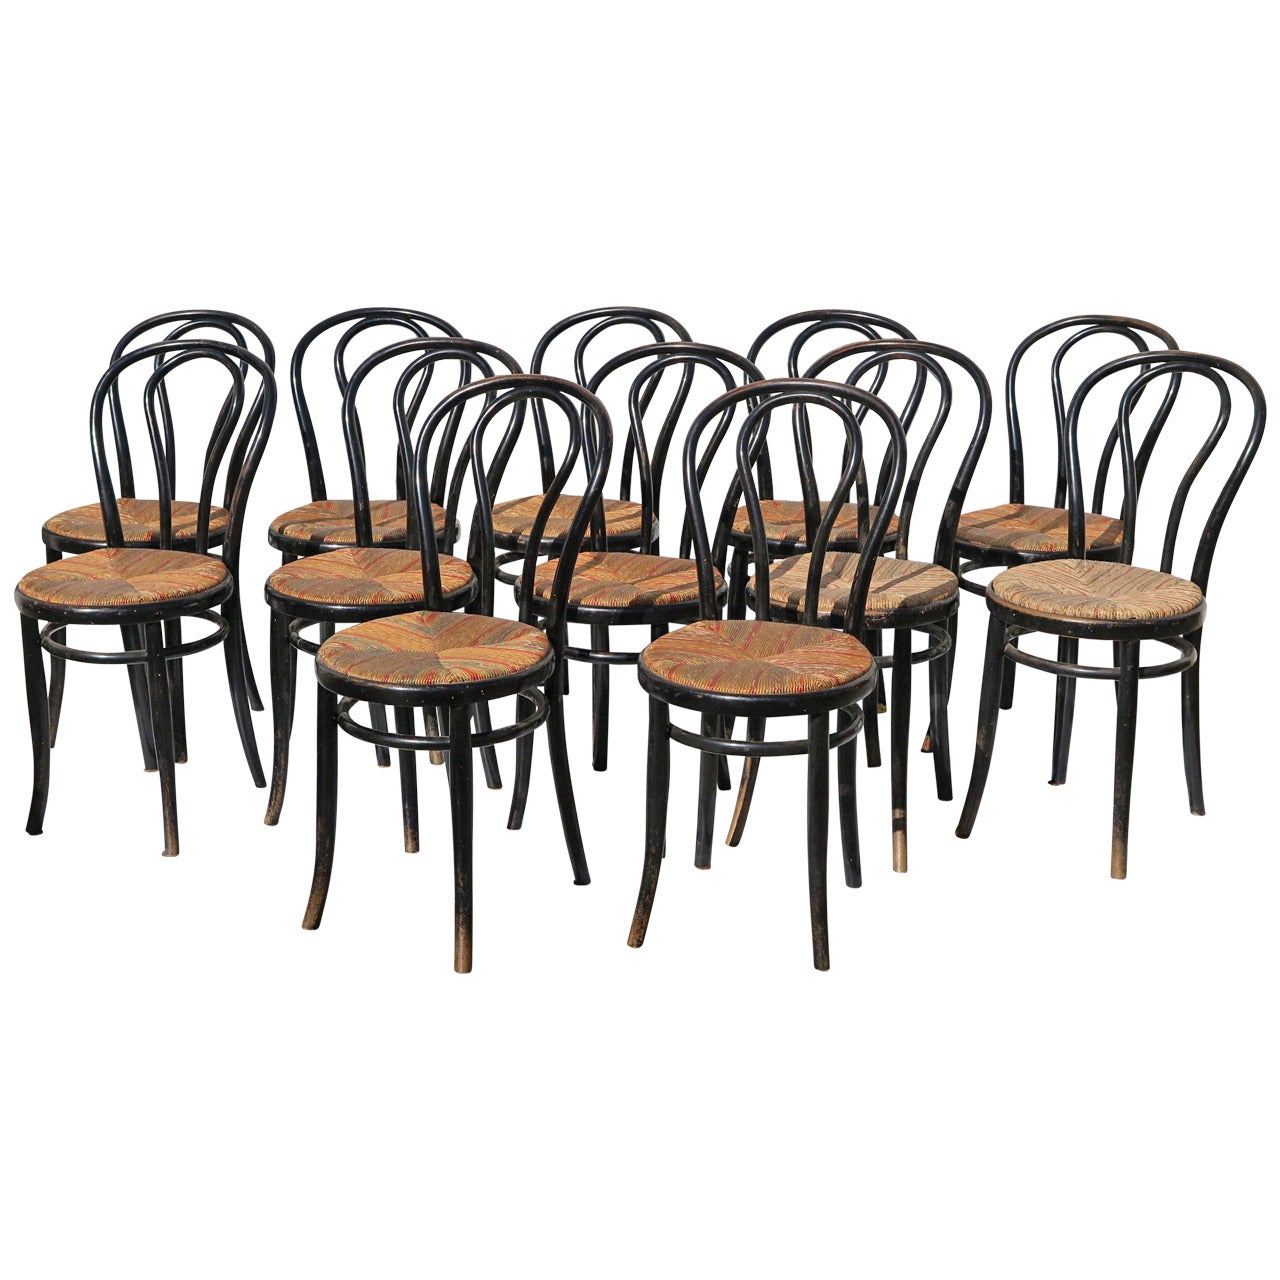 French Bistro Chairs - SIX AVAILABLE For Sale